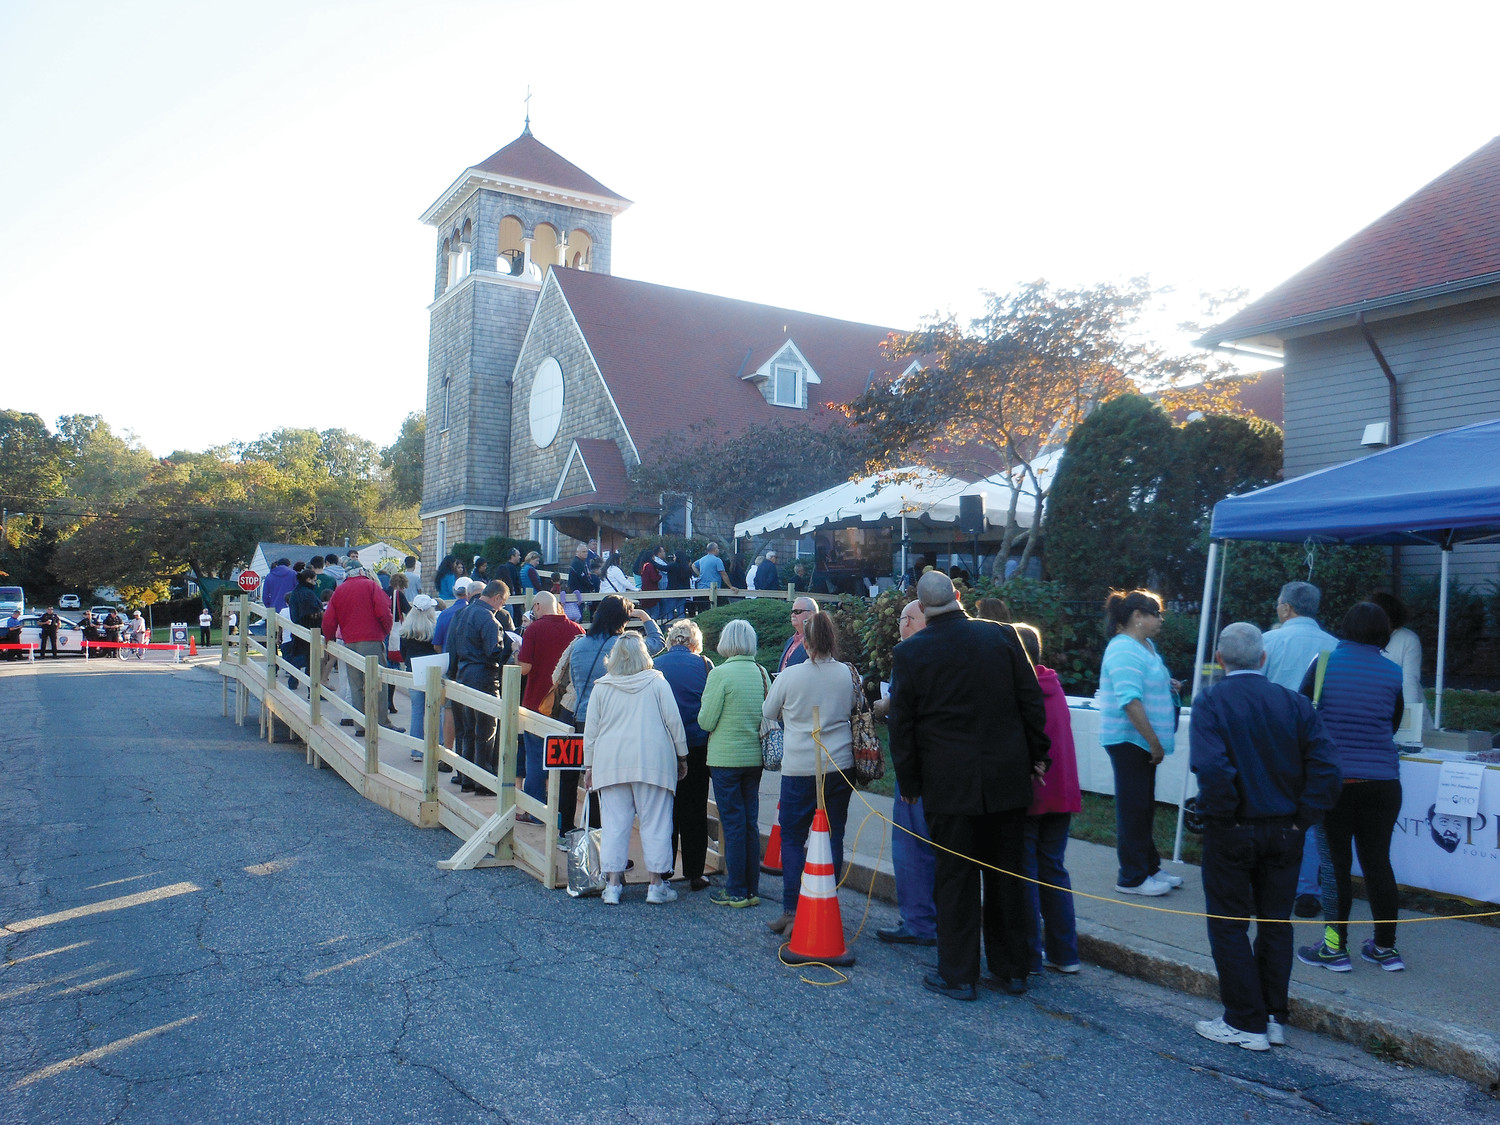 Crowds gather outside of St. Thomas More Church in Narragansett to venerate the relics of St. Padre Pio.